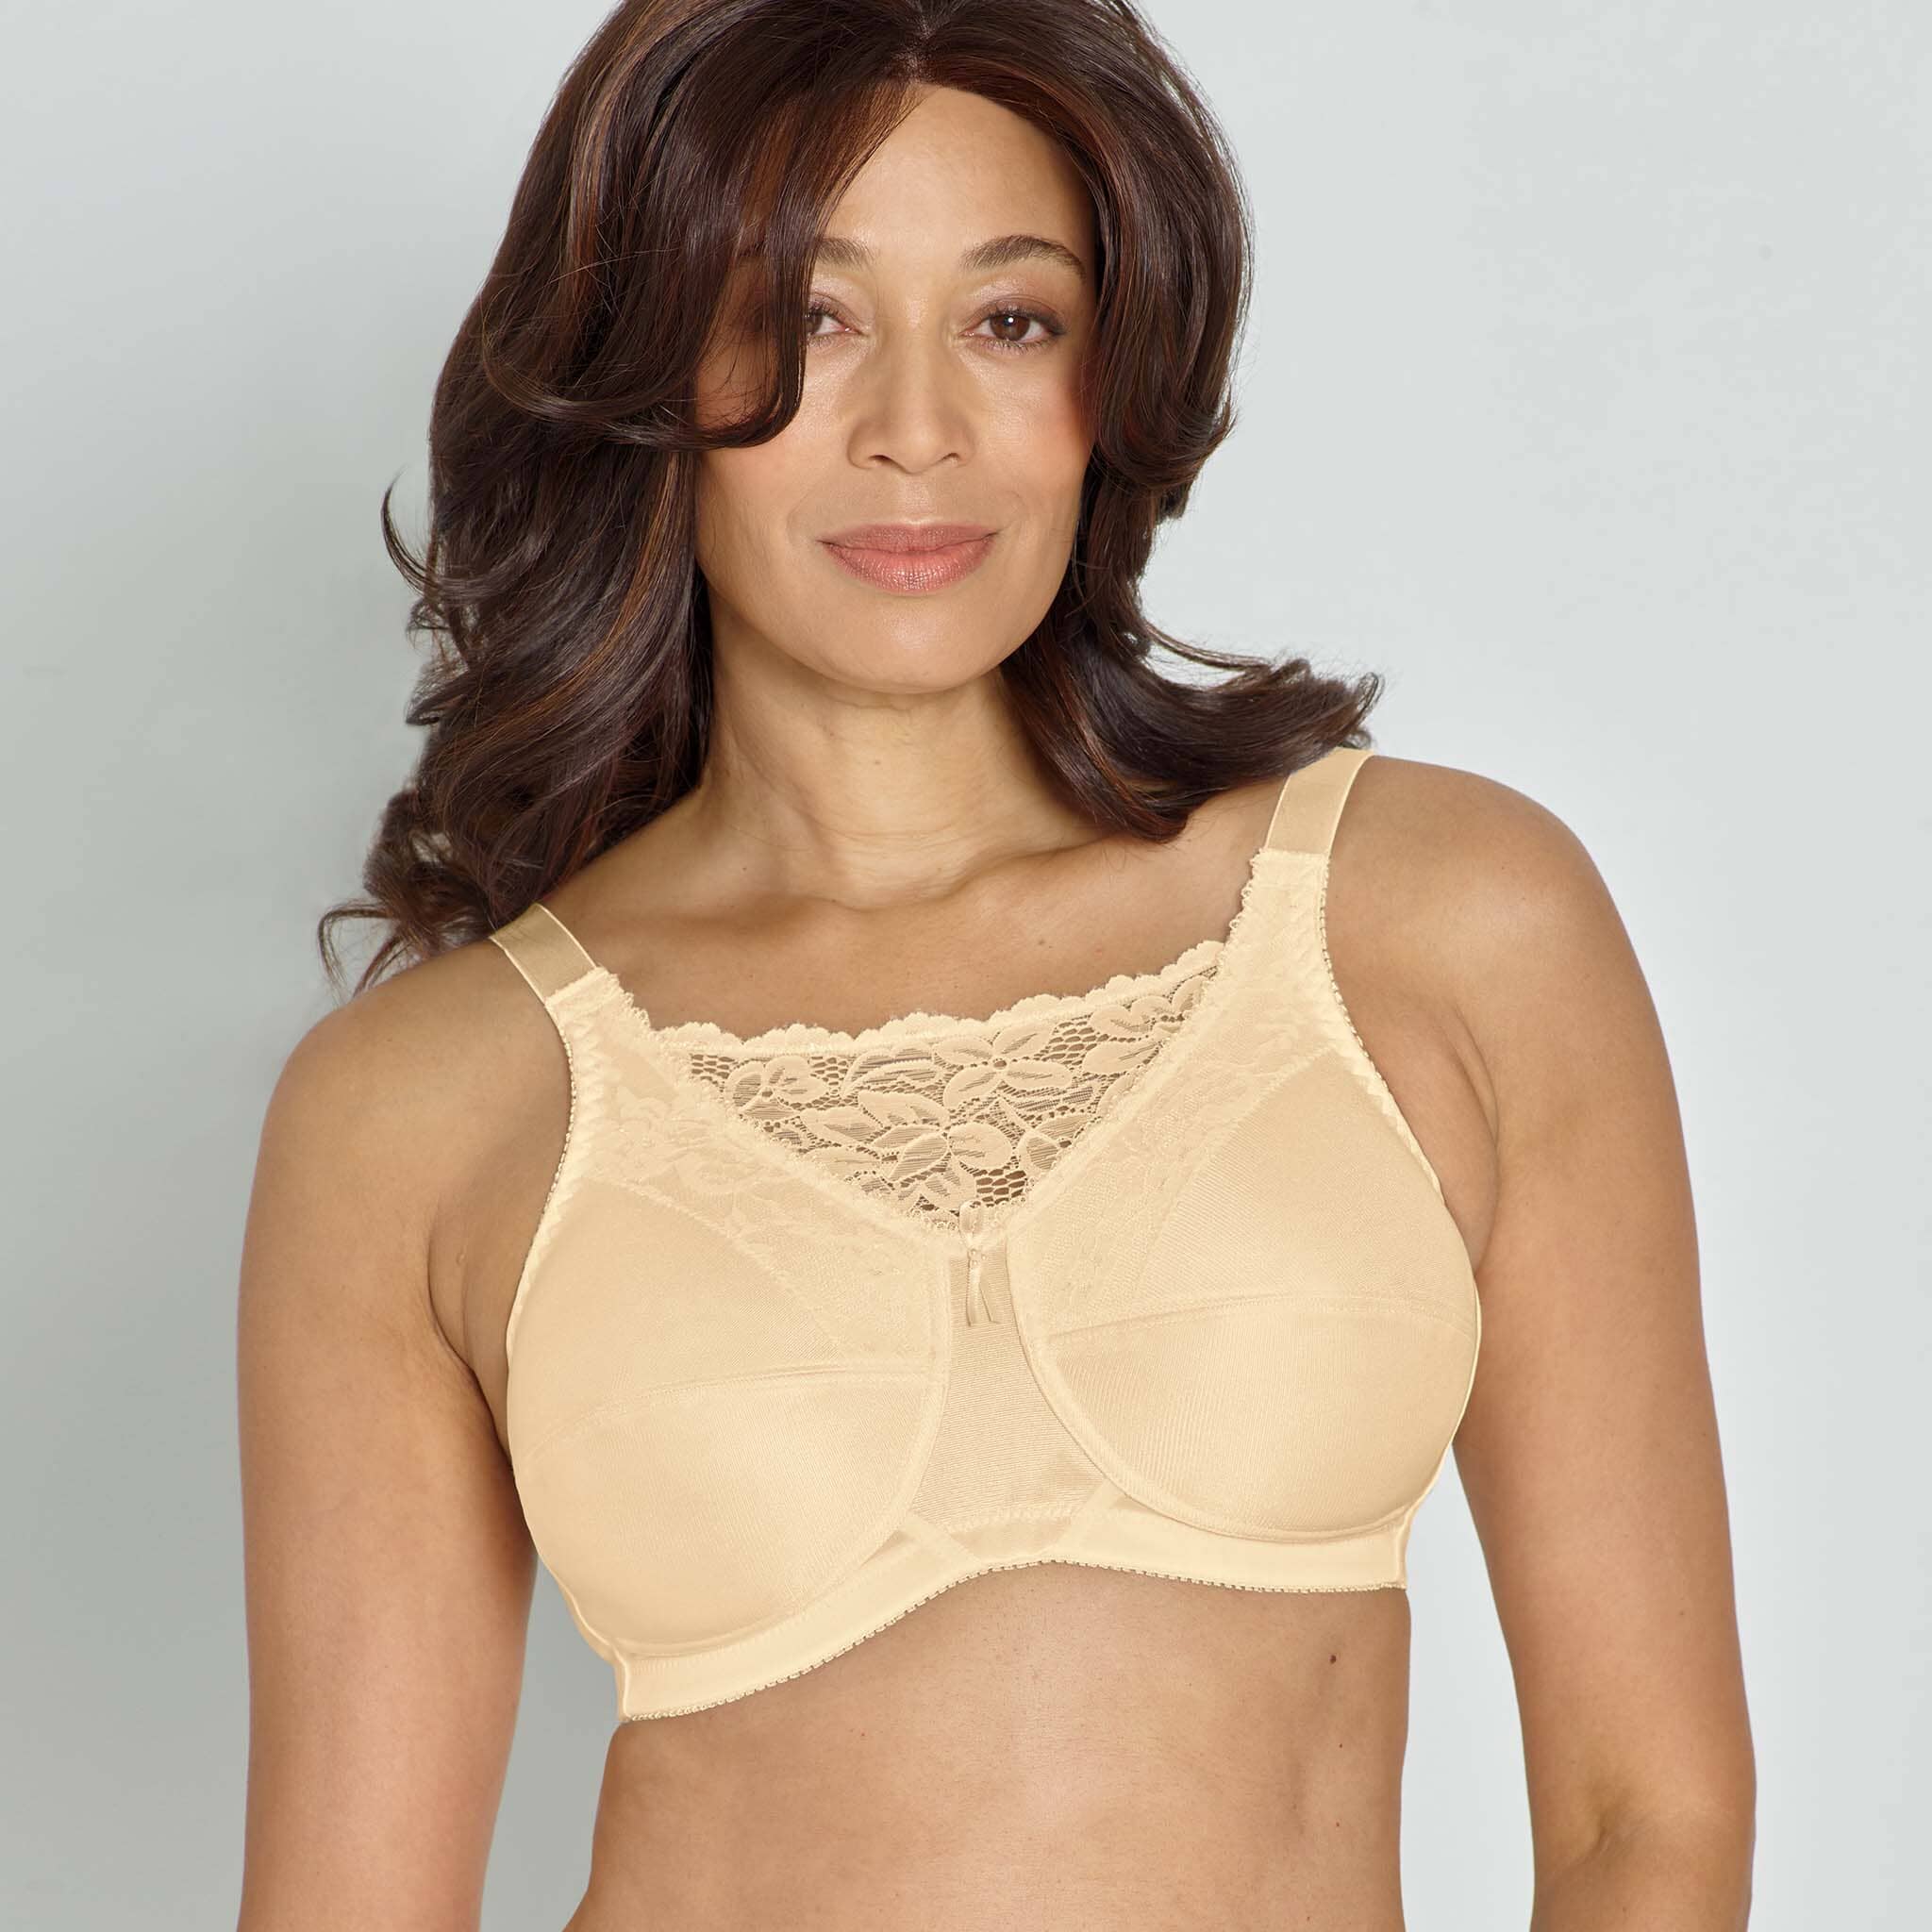 Discover the brand that designs bras in hard-to-find sizes and